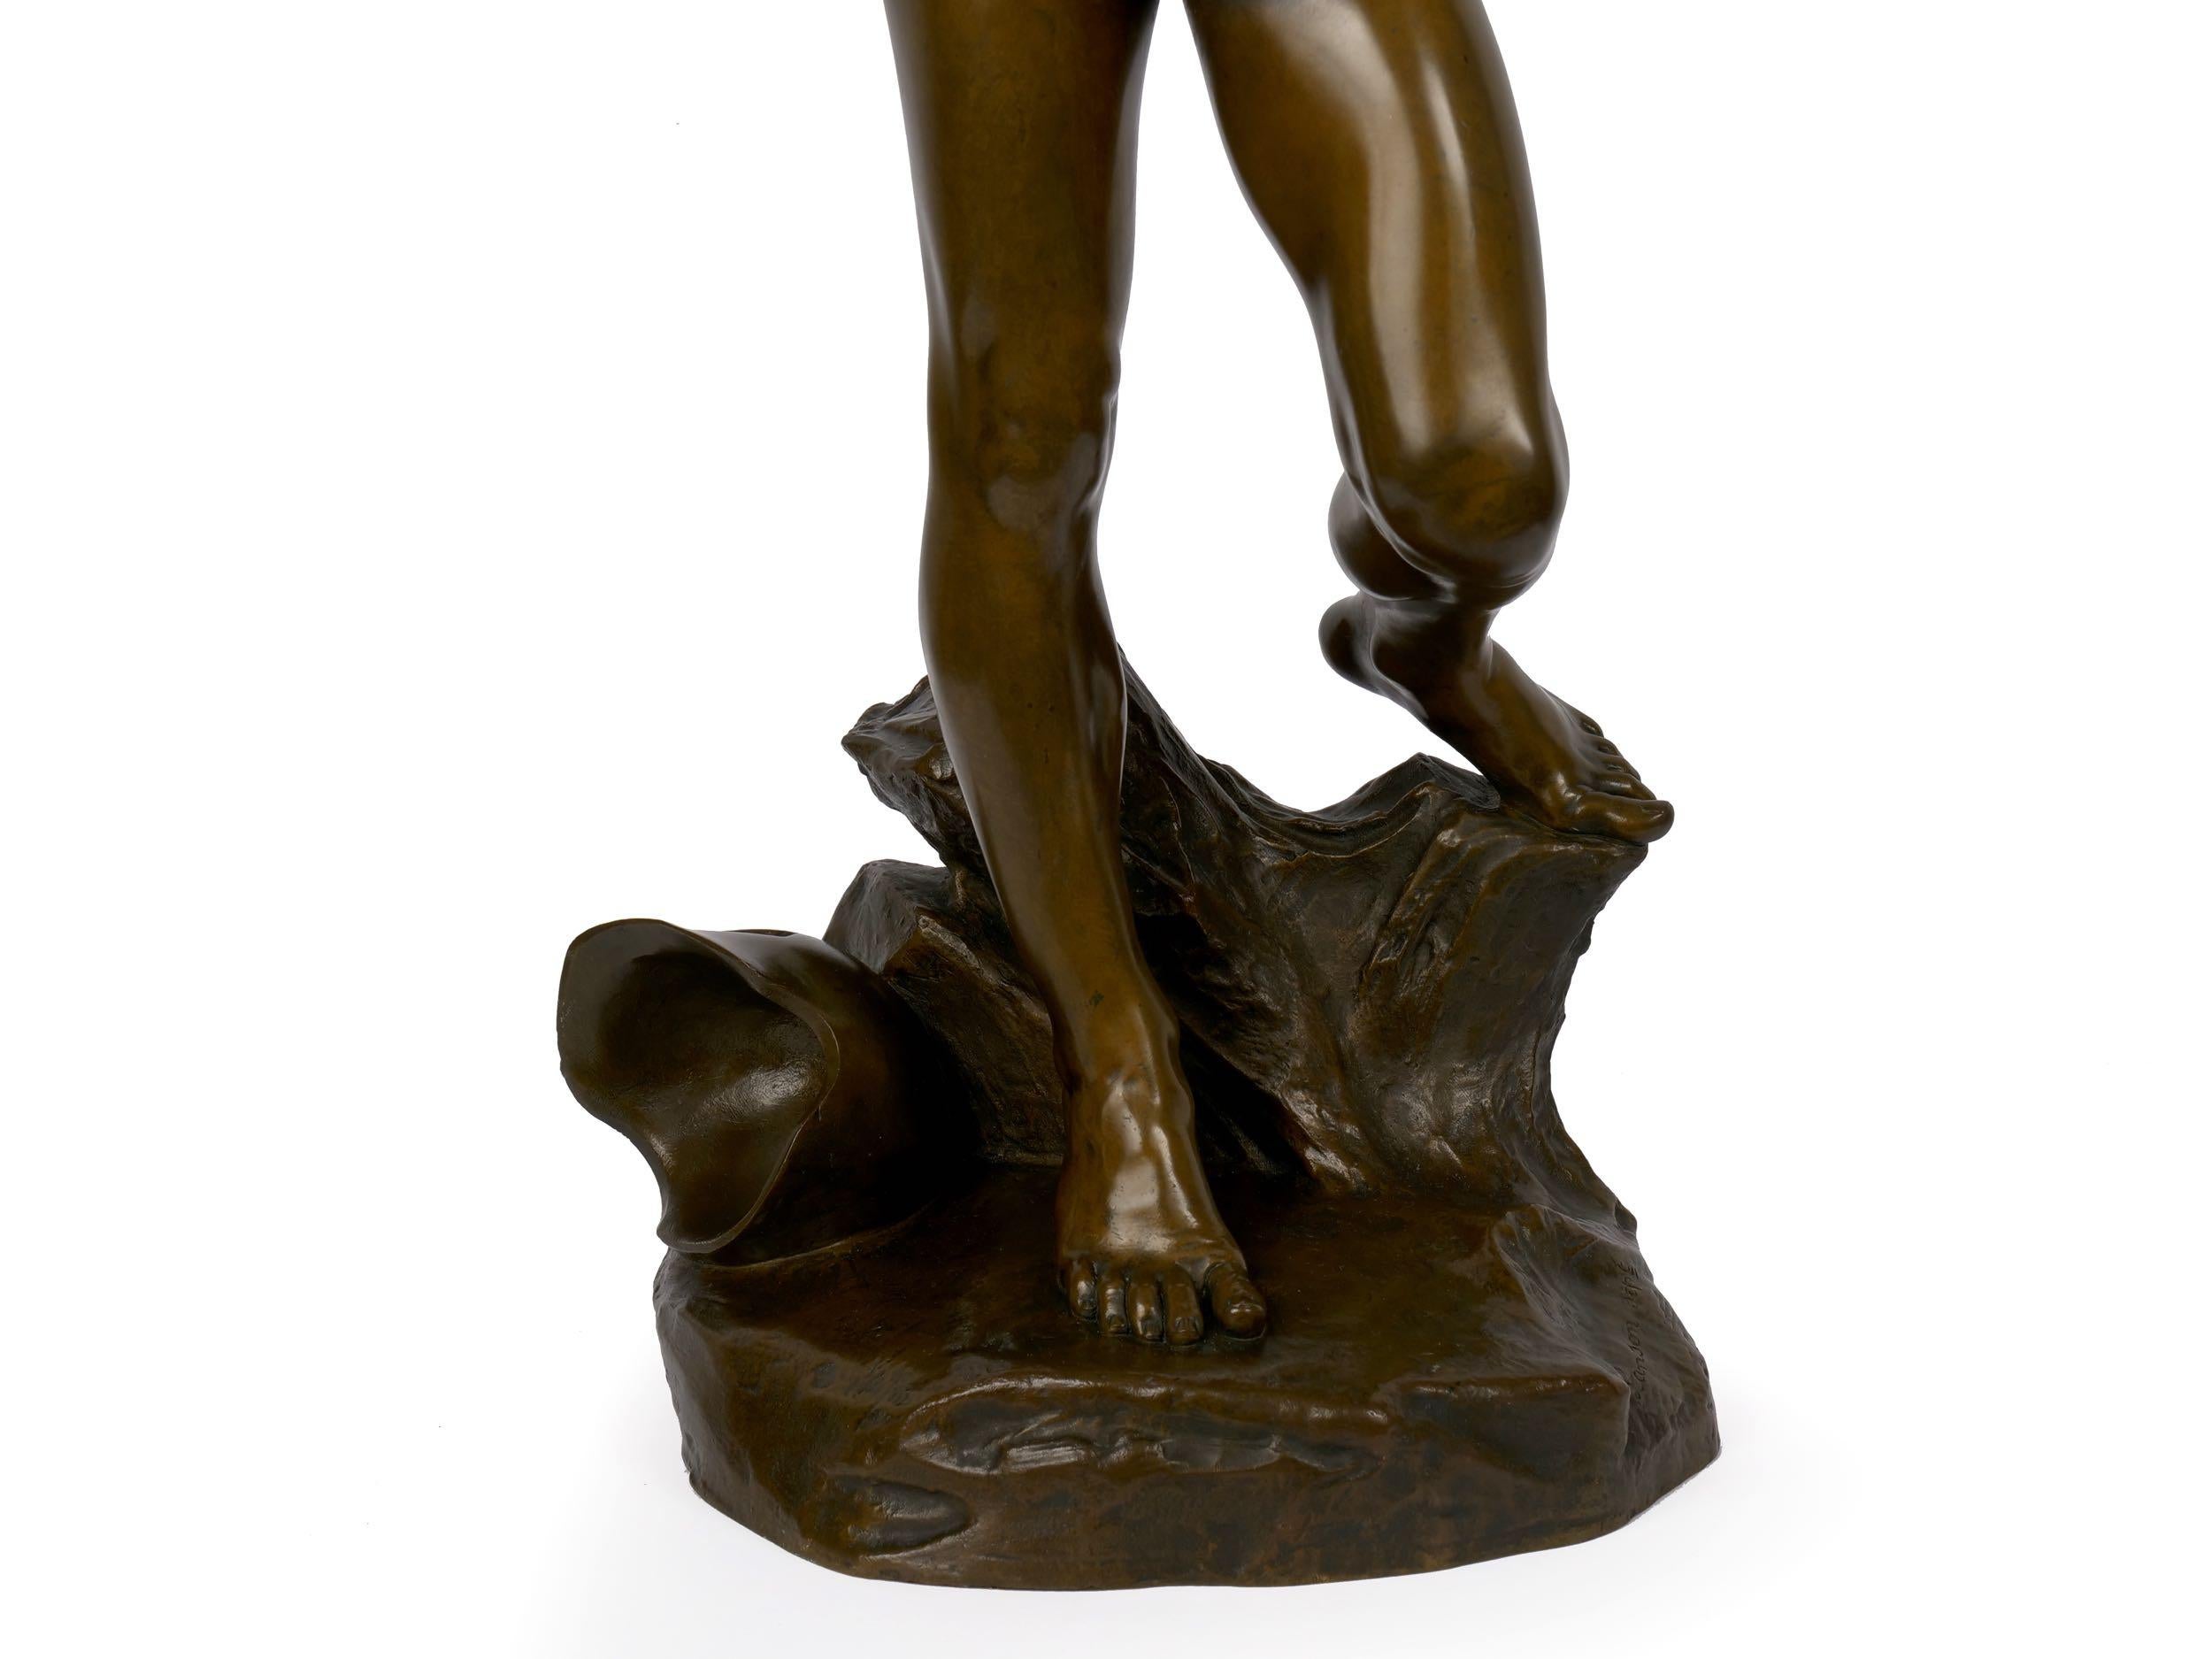 “Jason and the Golden Fleece” '1875' French Bronze Sculpture by Lanson & Susse 3